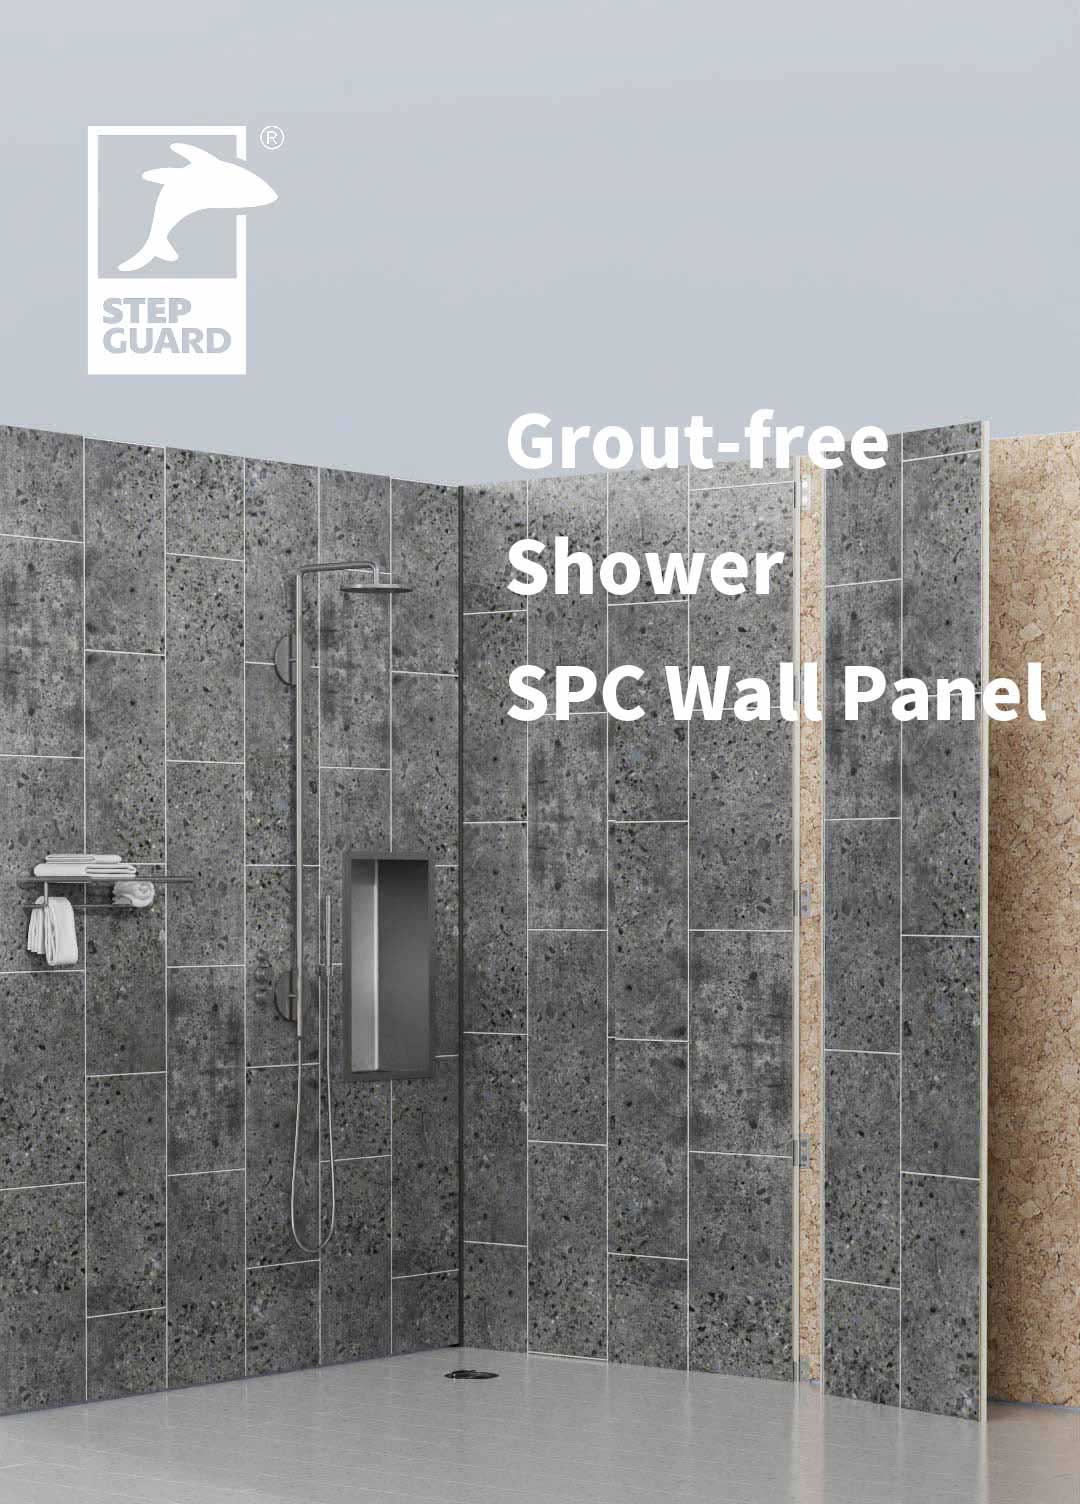 Grout free shower spc wall panel